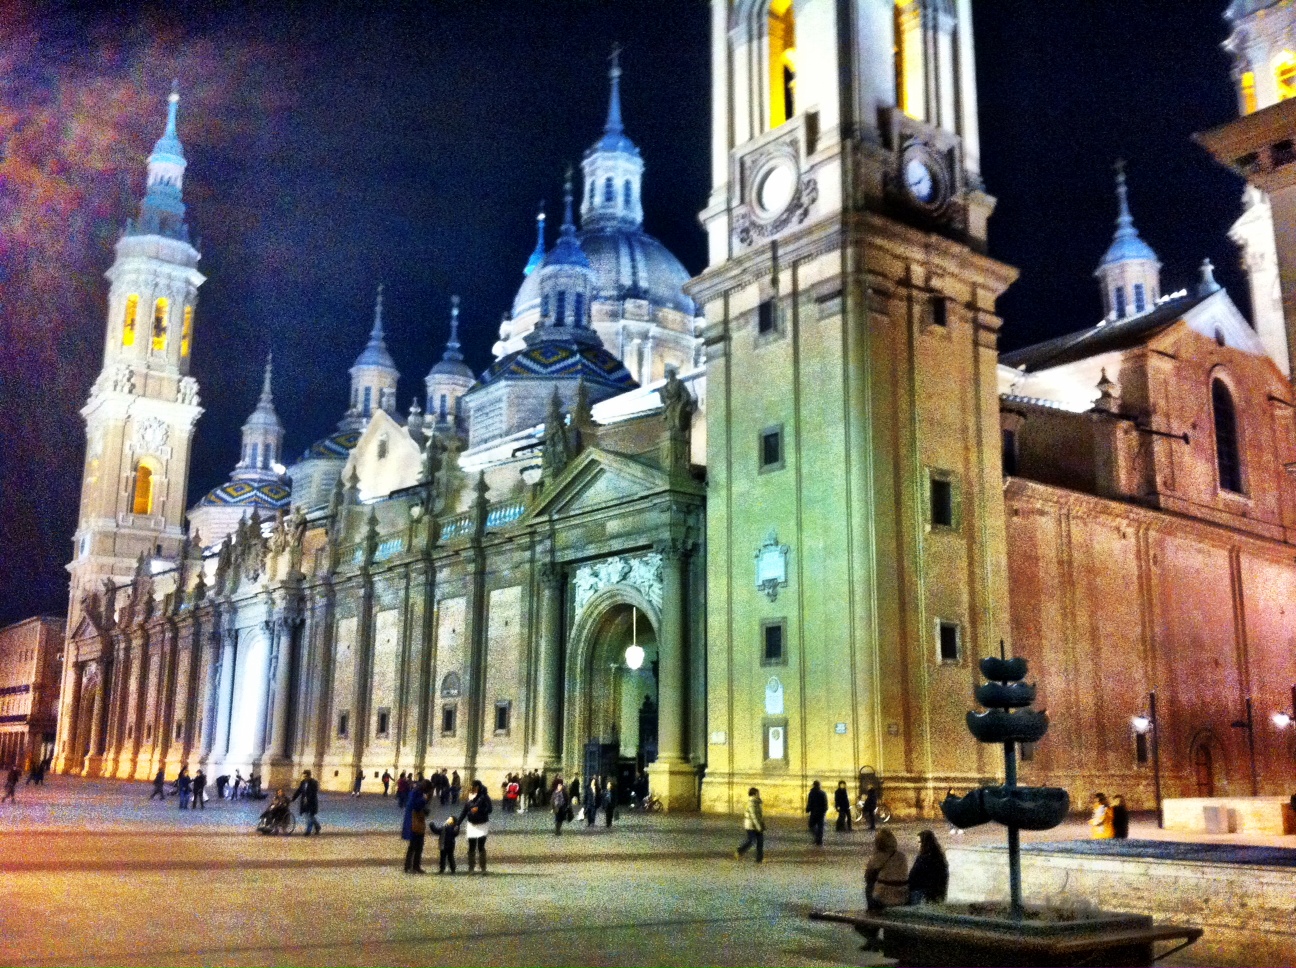 Zaragoza and the Basilica of Our Lady of the Pillar